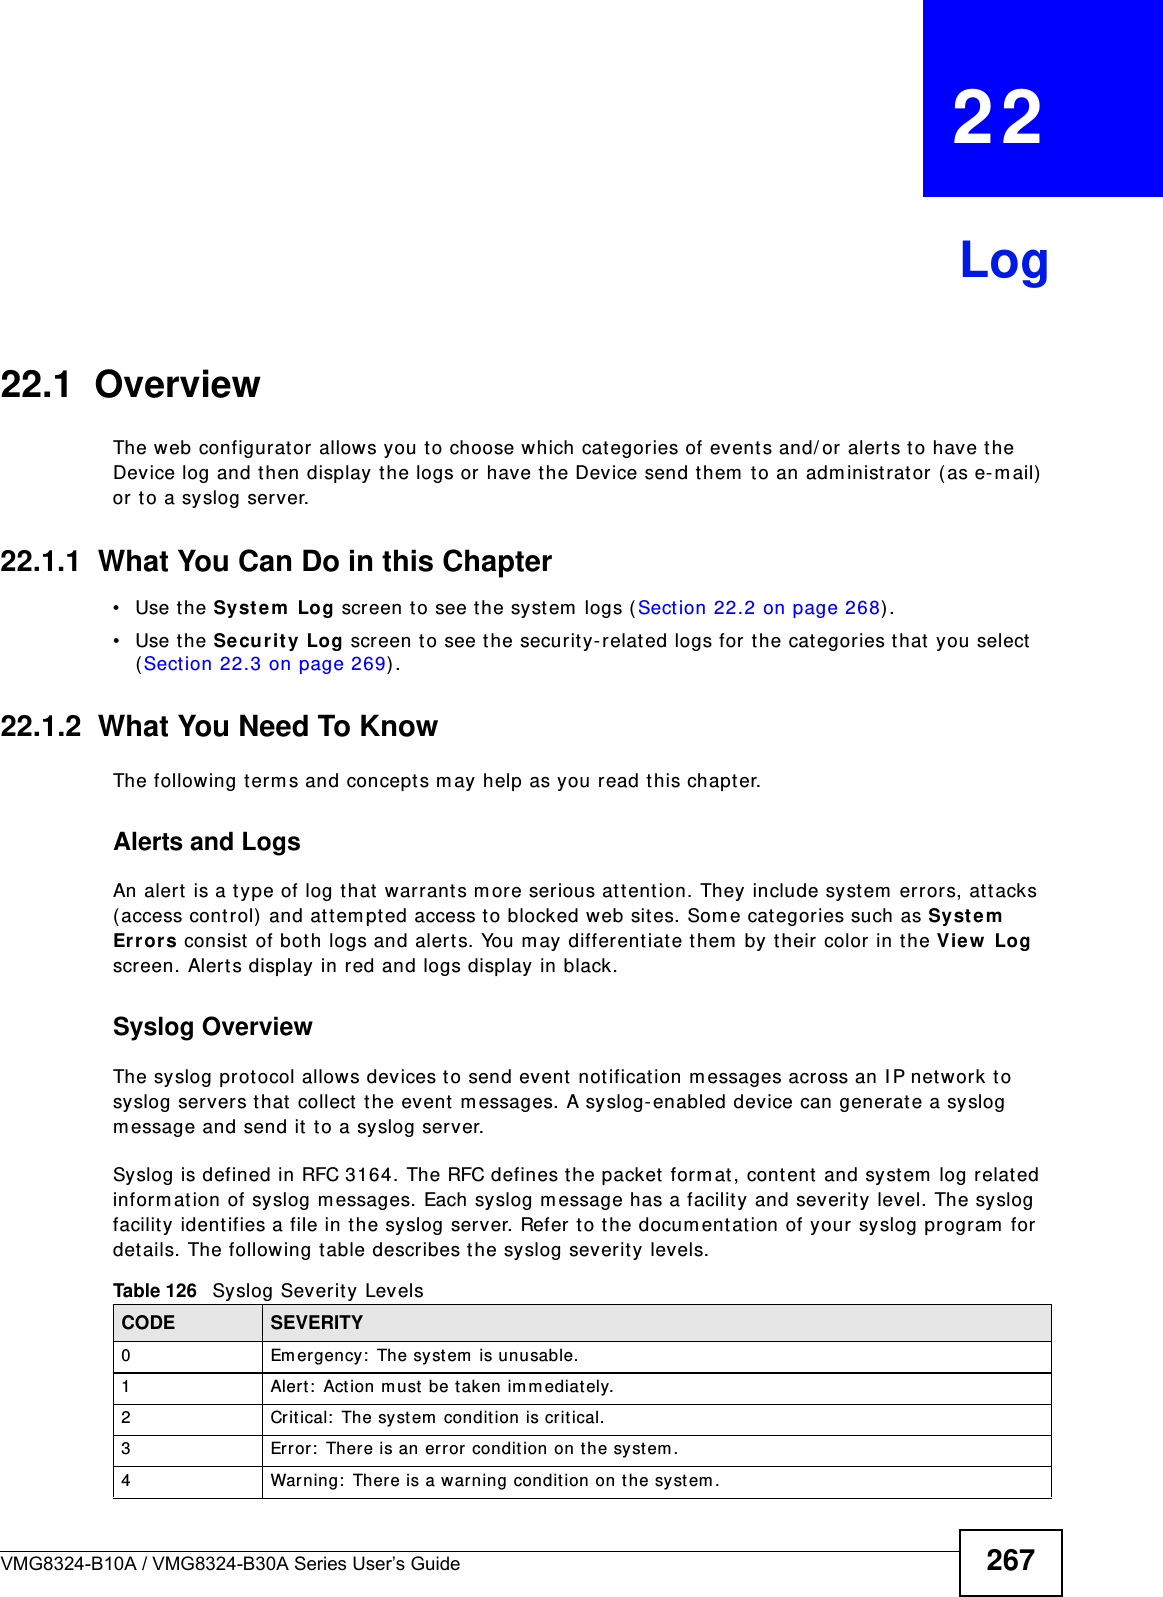 VMG8324-B10A / VMG8324-B30A Series User’s Guide 267CHAPTER   22Log22.1  OverviewThe web configurat or allows you to choose which cat egories of events and/ or alerts t o have the Device log and then display the logs or have the Device send them  to an adm inistrat or ( as e-m ail)  or to a syslog server. 22.1.1  What You Can Do in this Chapter• Use the System  Log screen t o see t he system  logs ( Section 22.2 on page 268) .• Use the Security Log screen t o see t he security- relat ed logs for t he cat egories t hat  you select  (Section 22.3 on page 269) .22.1.2  What You Need To KnowThe following t erm s and concept s m ay help as you read this chapt er.Alerts and LogsAn alert  is a t ype of log t hat  warrant s more serious att ention. They include system  errors, at tacks ( access cont rol) and at tem pted access t o blocked web sit es. Som e categories such as Syst em  Er rors consist of both logs and alerts. You may differentiate them  by their color in t he V iew  Log screen. Alert s display in red and logs display in black.Syslog Overview The syslog protocol allows devices t o send event not ificat ion m essages across an I P net work t o syslog servers t hat  collect the event m essages. A syslog- enabled device can generat e a syslog m essage and send it to a syslog server.Syslog is defined in RFC 3164. The RFC defines t he packet form at , content and syst em  log relat ed inform at ion of syslog m essages. Each syslog m essage has a facility and severit y level. The syslog facilit y ident ifies a file in the syslog server. Refer to the docum ent ation of your syslog program  for  det ails. The follow ing t able describes the syslog sever ity levels. Table 126   Syslog Severit y LevelsCODE SEVERITY0 Em ergency :  The system  is unusable.1 Alert:  Action m ust be taken im mediat ely.2 Critical:  The syst em  condit ion is critical.3 Error:  There is an error  condit ion on the system .4 Warning:  There is a warning condition on the syst em .